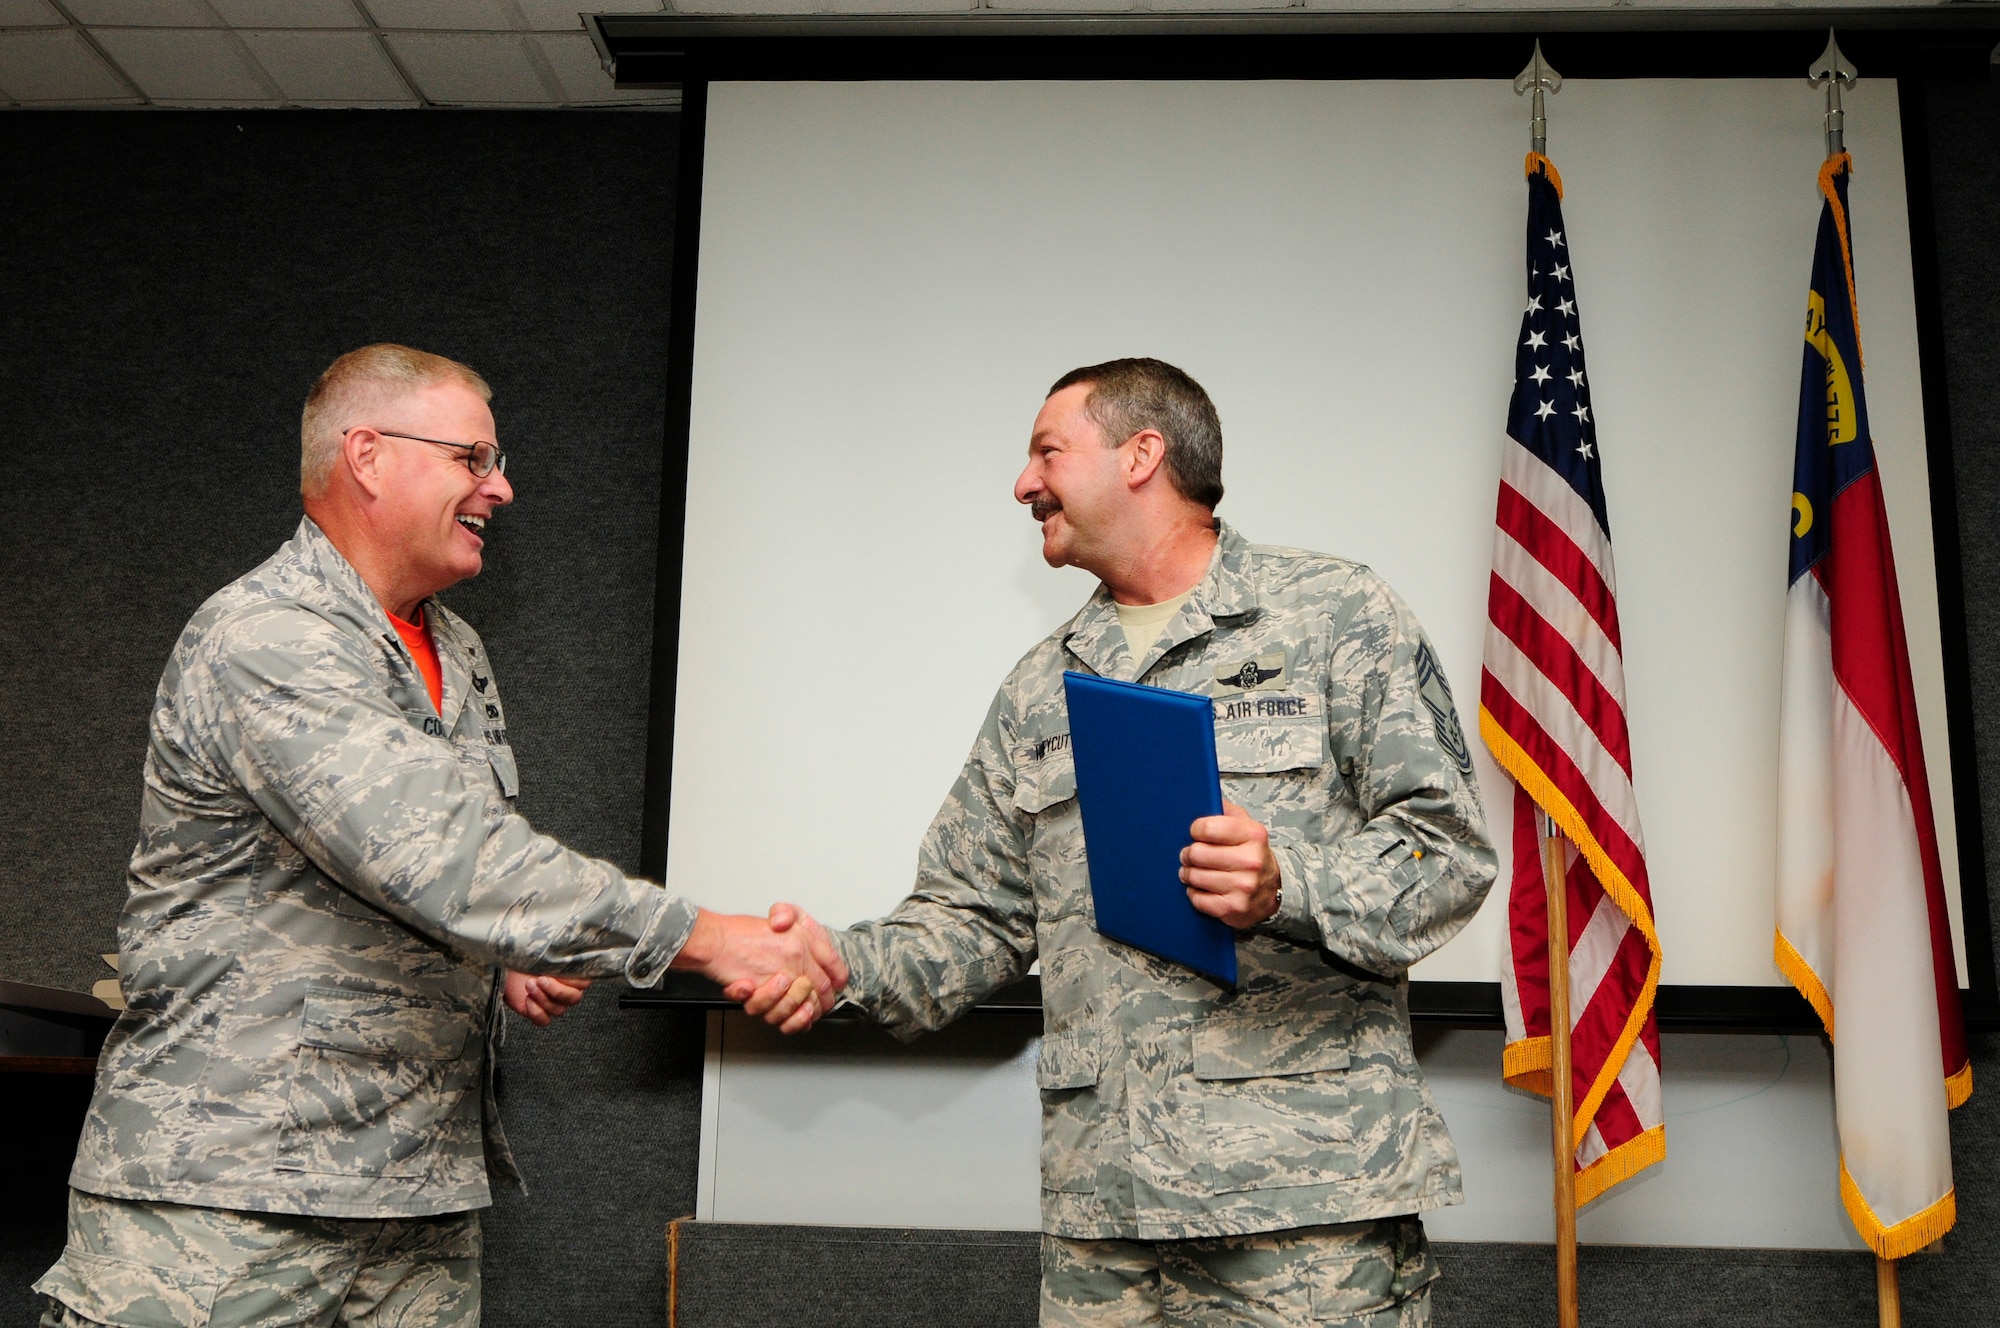 U.S. Air Force Col. Marshall C. Collins (left), commander, 145th Airlift Wing, shakes hands with Chief Master Sgt. Andrew Huneycutt (right), 145th Operations Support Squadron (OSS) chief loadmaster, after presenting him with the 12,500 Mishap-Free Flying Hour Milestone Award during a ceremony held at the North Carolina Air National Guard Base, Charlotte Douglas International Airport, June 4, 2016. Huneycutt provides leadership and management of the 156th Airlift Squadron and 145th OSS flying and ground training programs which ensures operational readiness of its members. (U.S. Air National Guard photo by Staff Sgt. Julianne M. Showalter/Released)